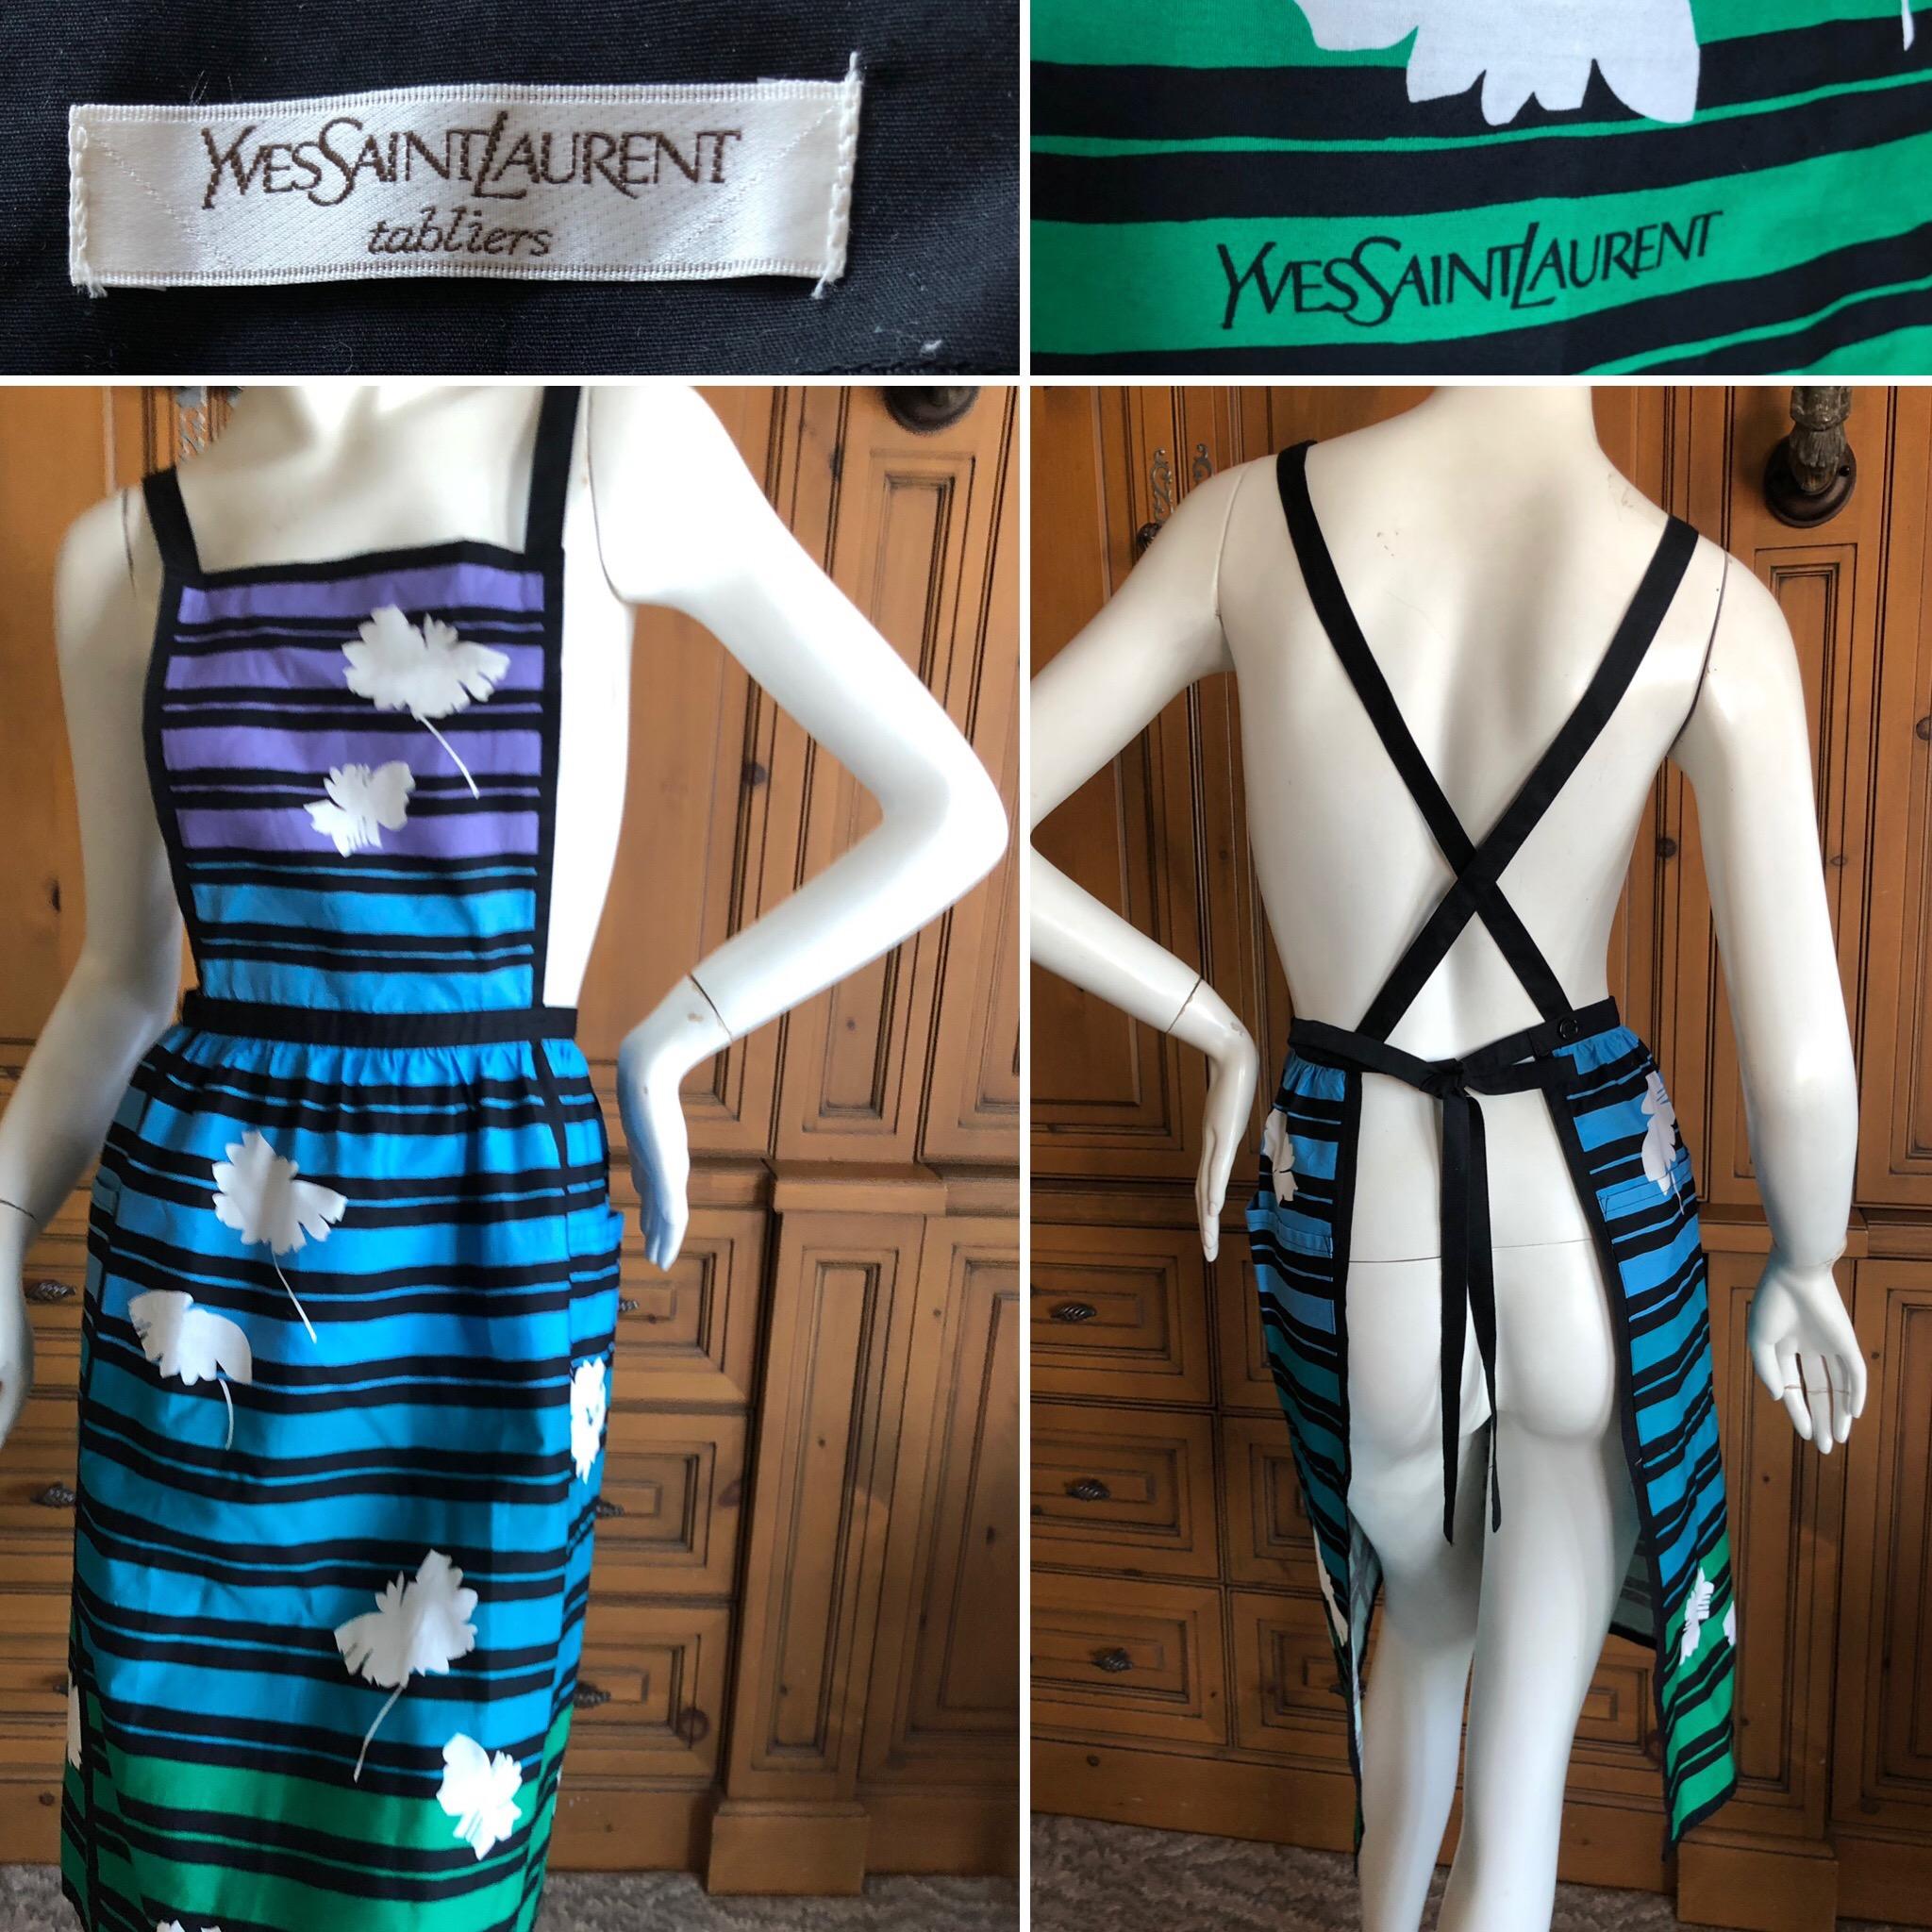 Yves Saint Laurent Vintage 70's Ombre Cotton Striped Cook's Apron
So charming, for the collector
New unworn
48' long